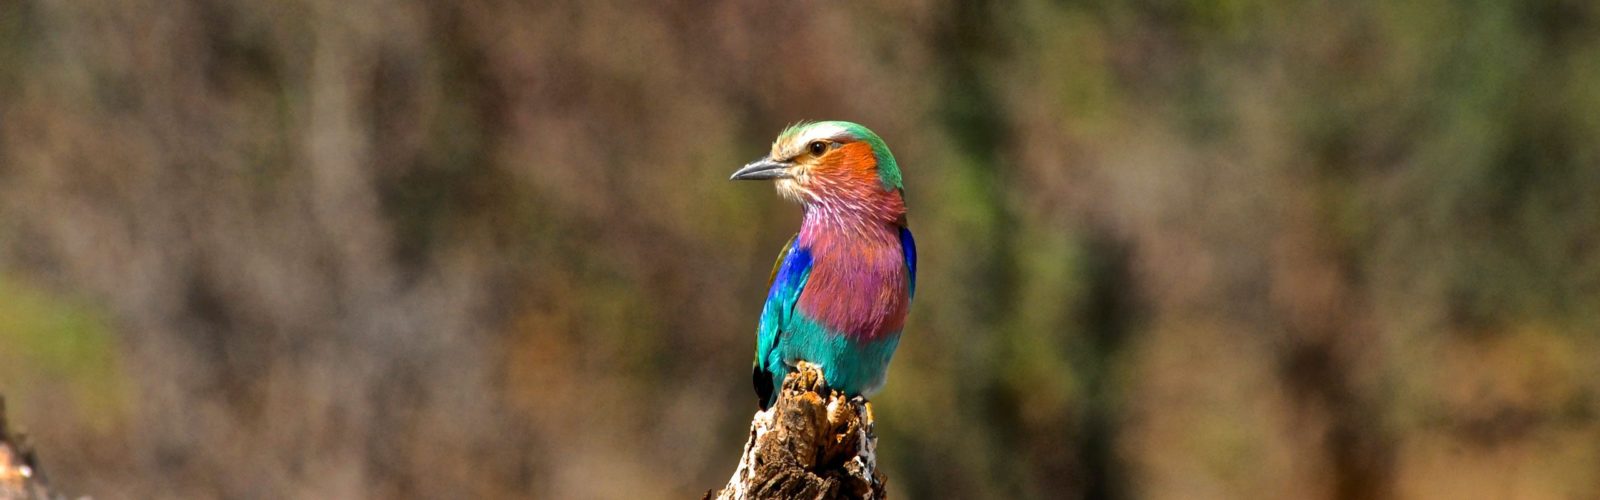 Bomani-Tented-Lodge---Lilac-Breasted-Roller